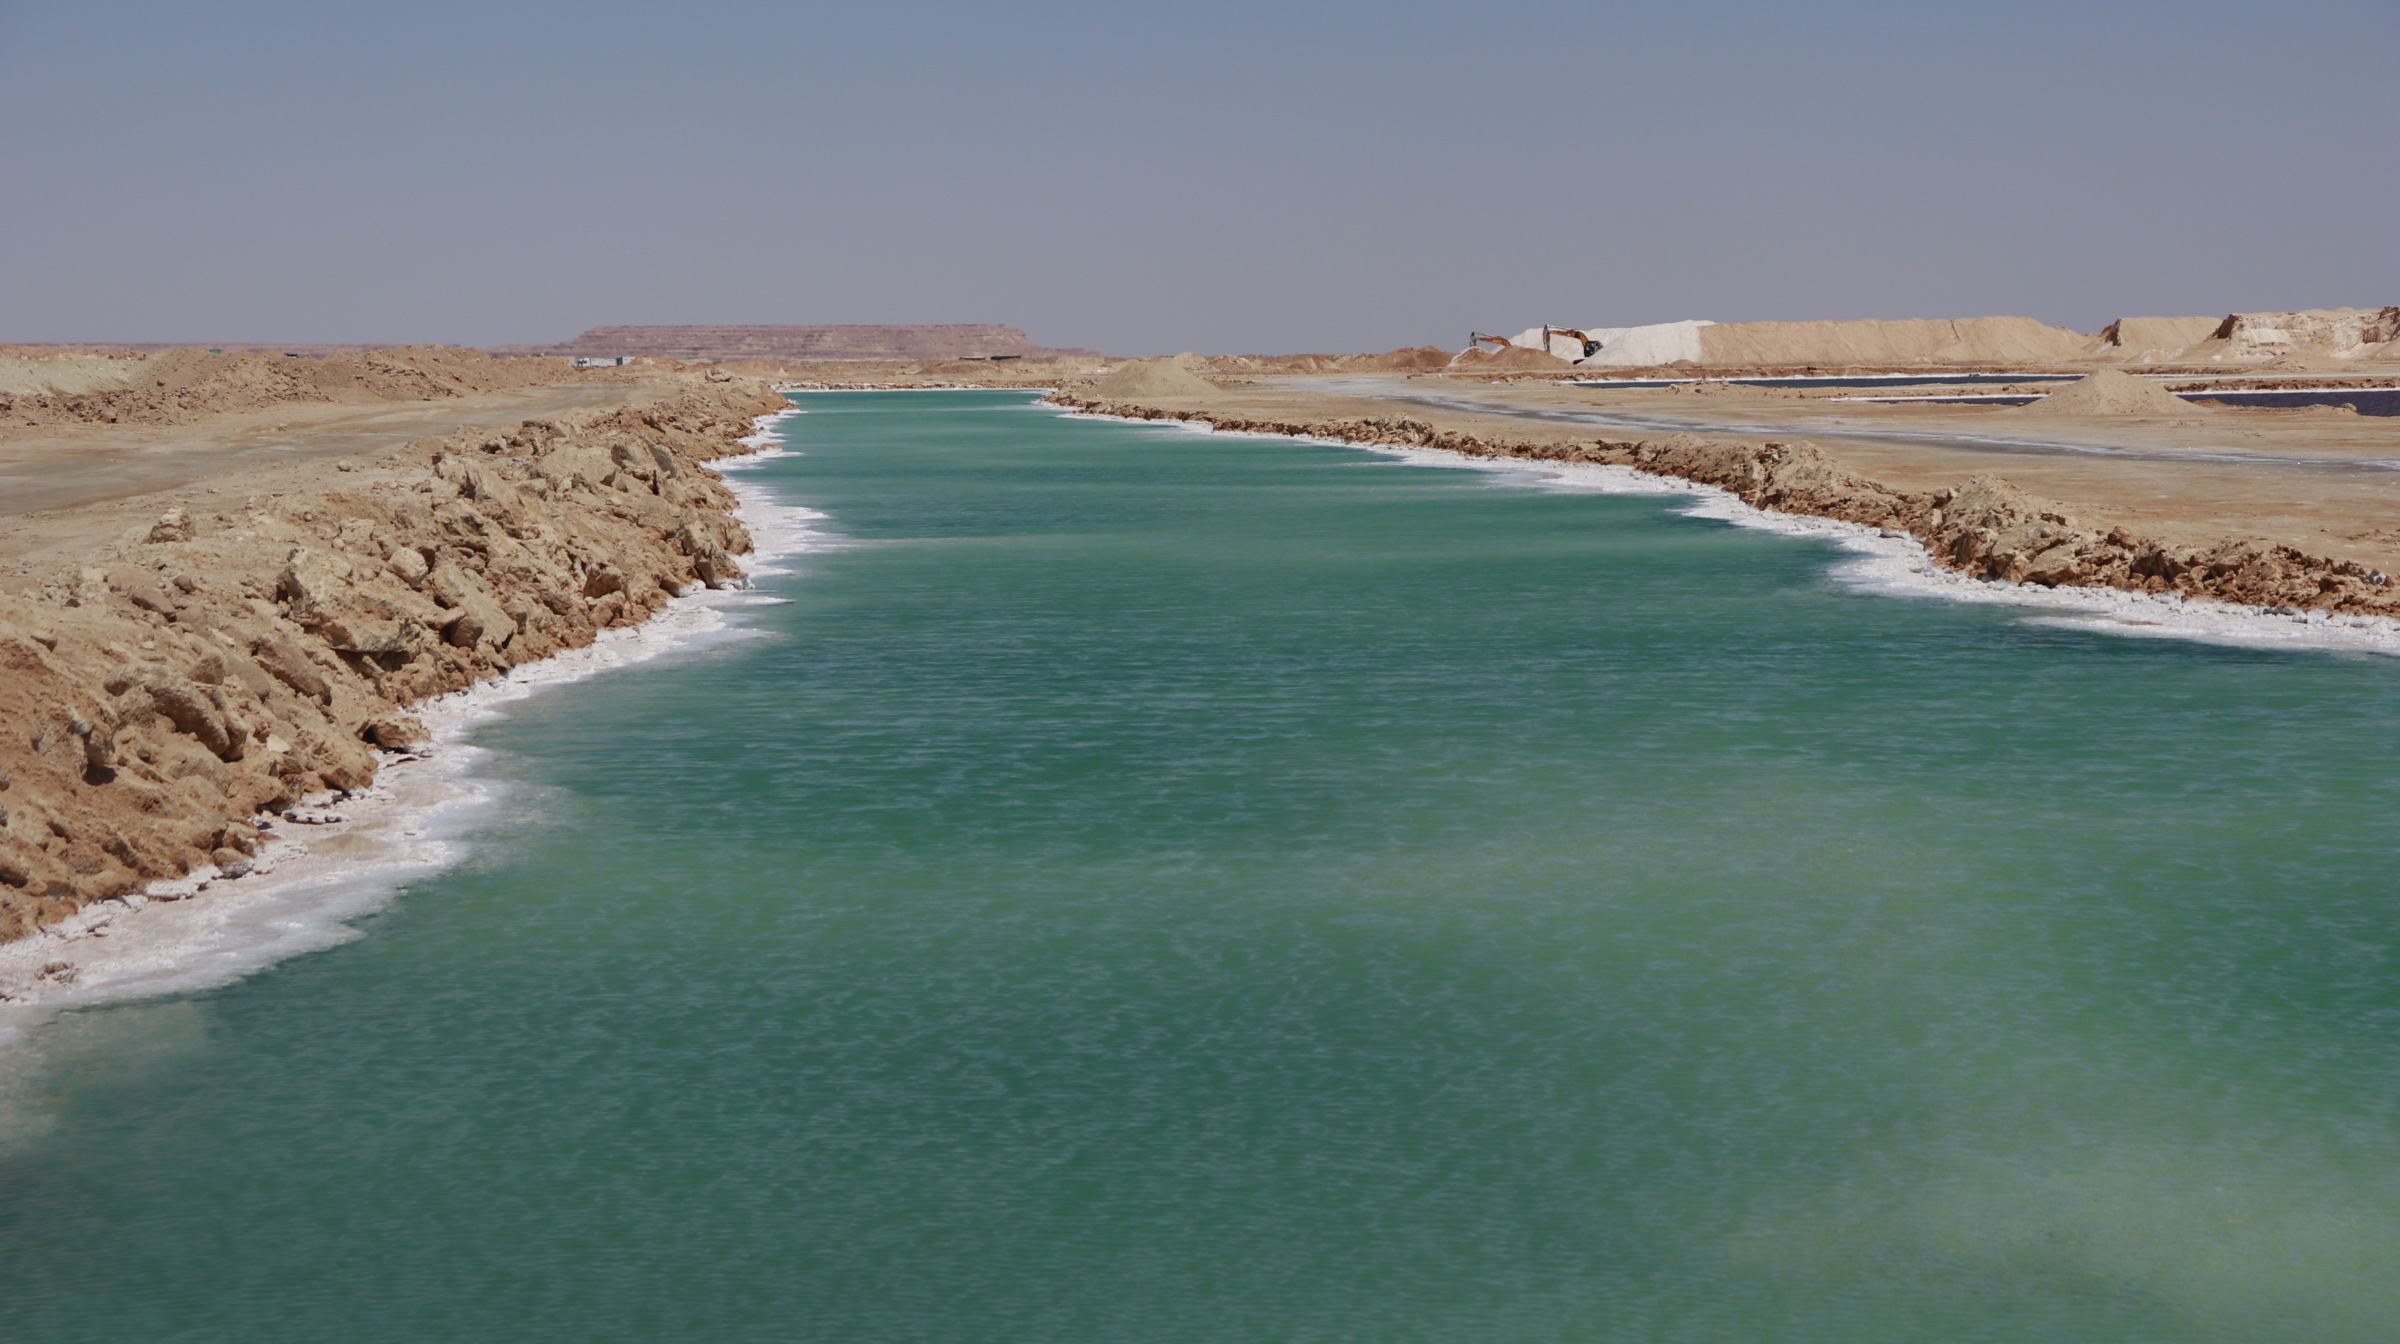 Siwa Oasis, Egypt: A Paradise in the Western Desert